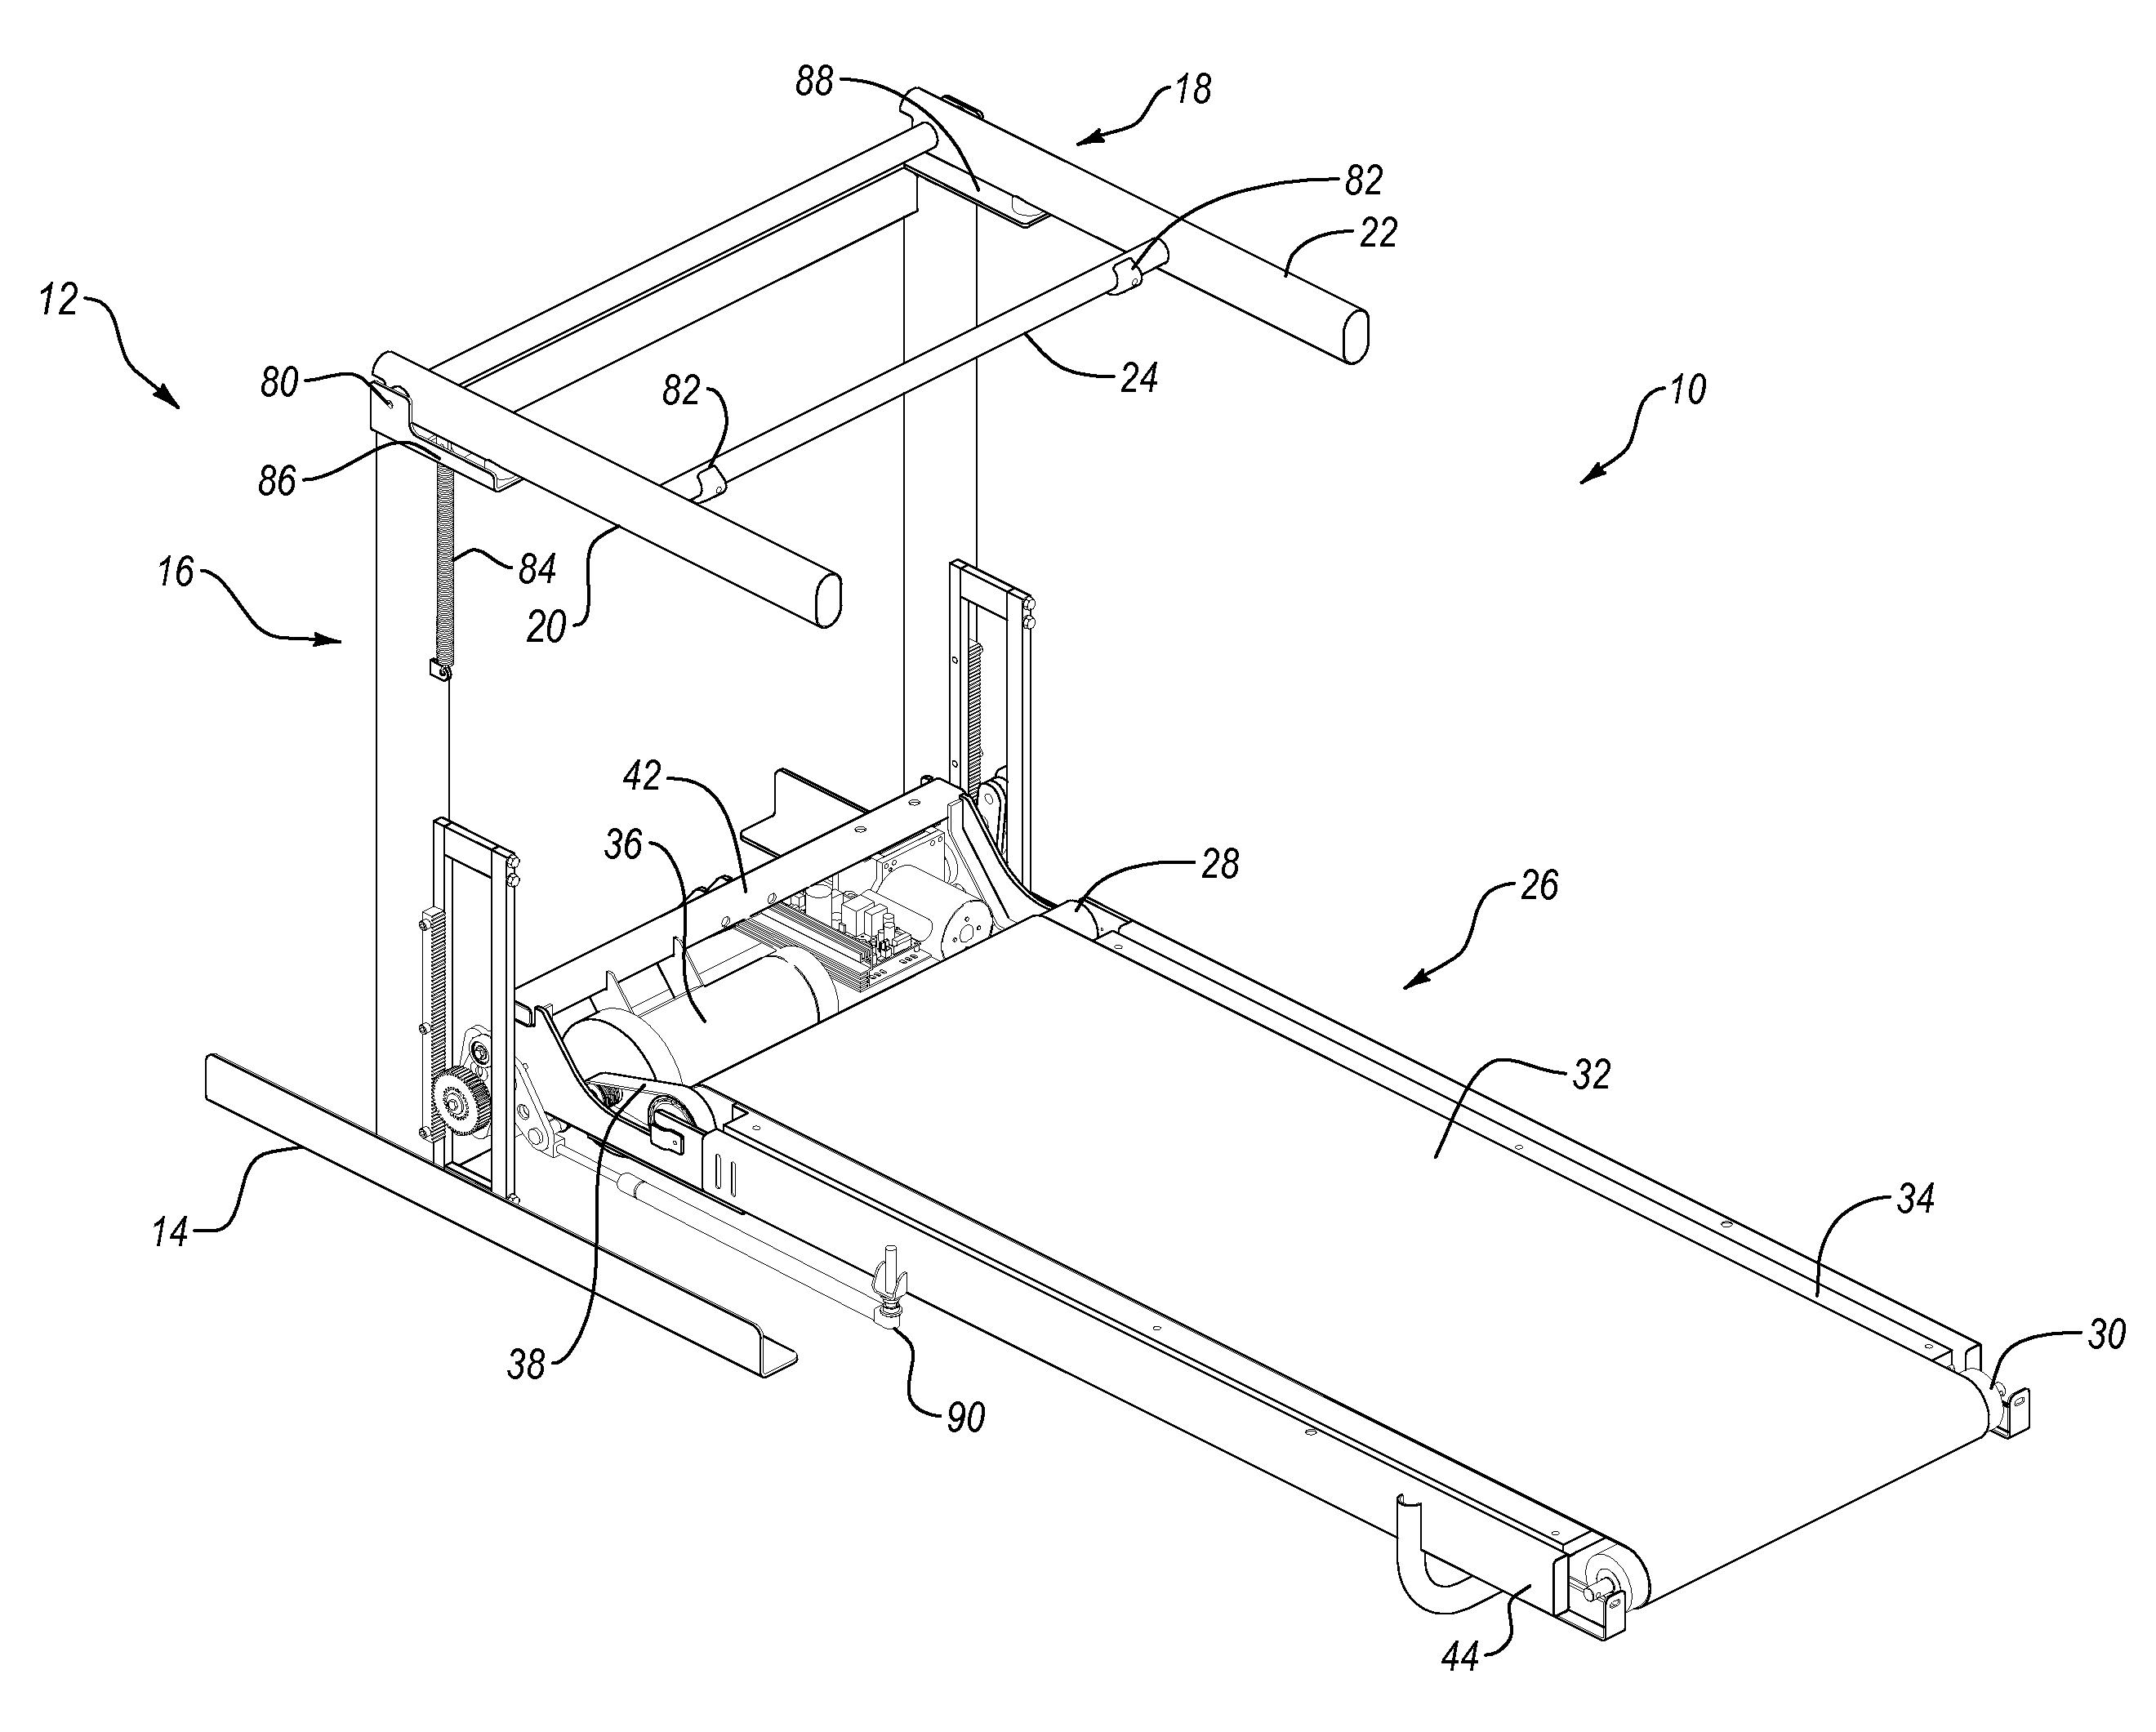 Exercise device with rack and pinion incline adjusting mechanism